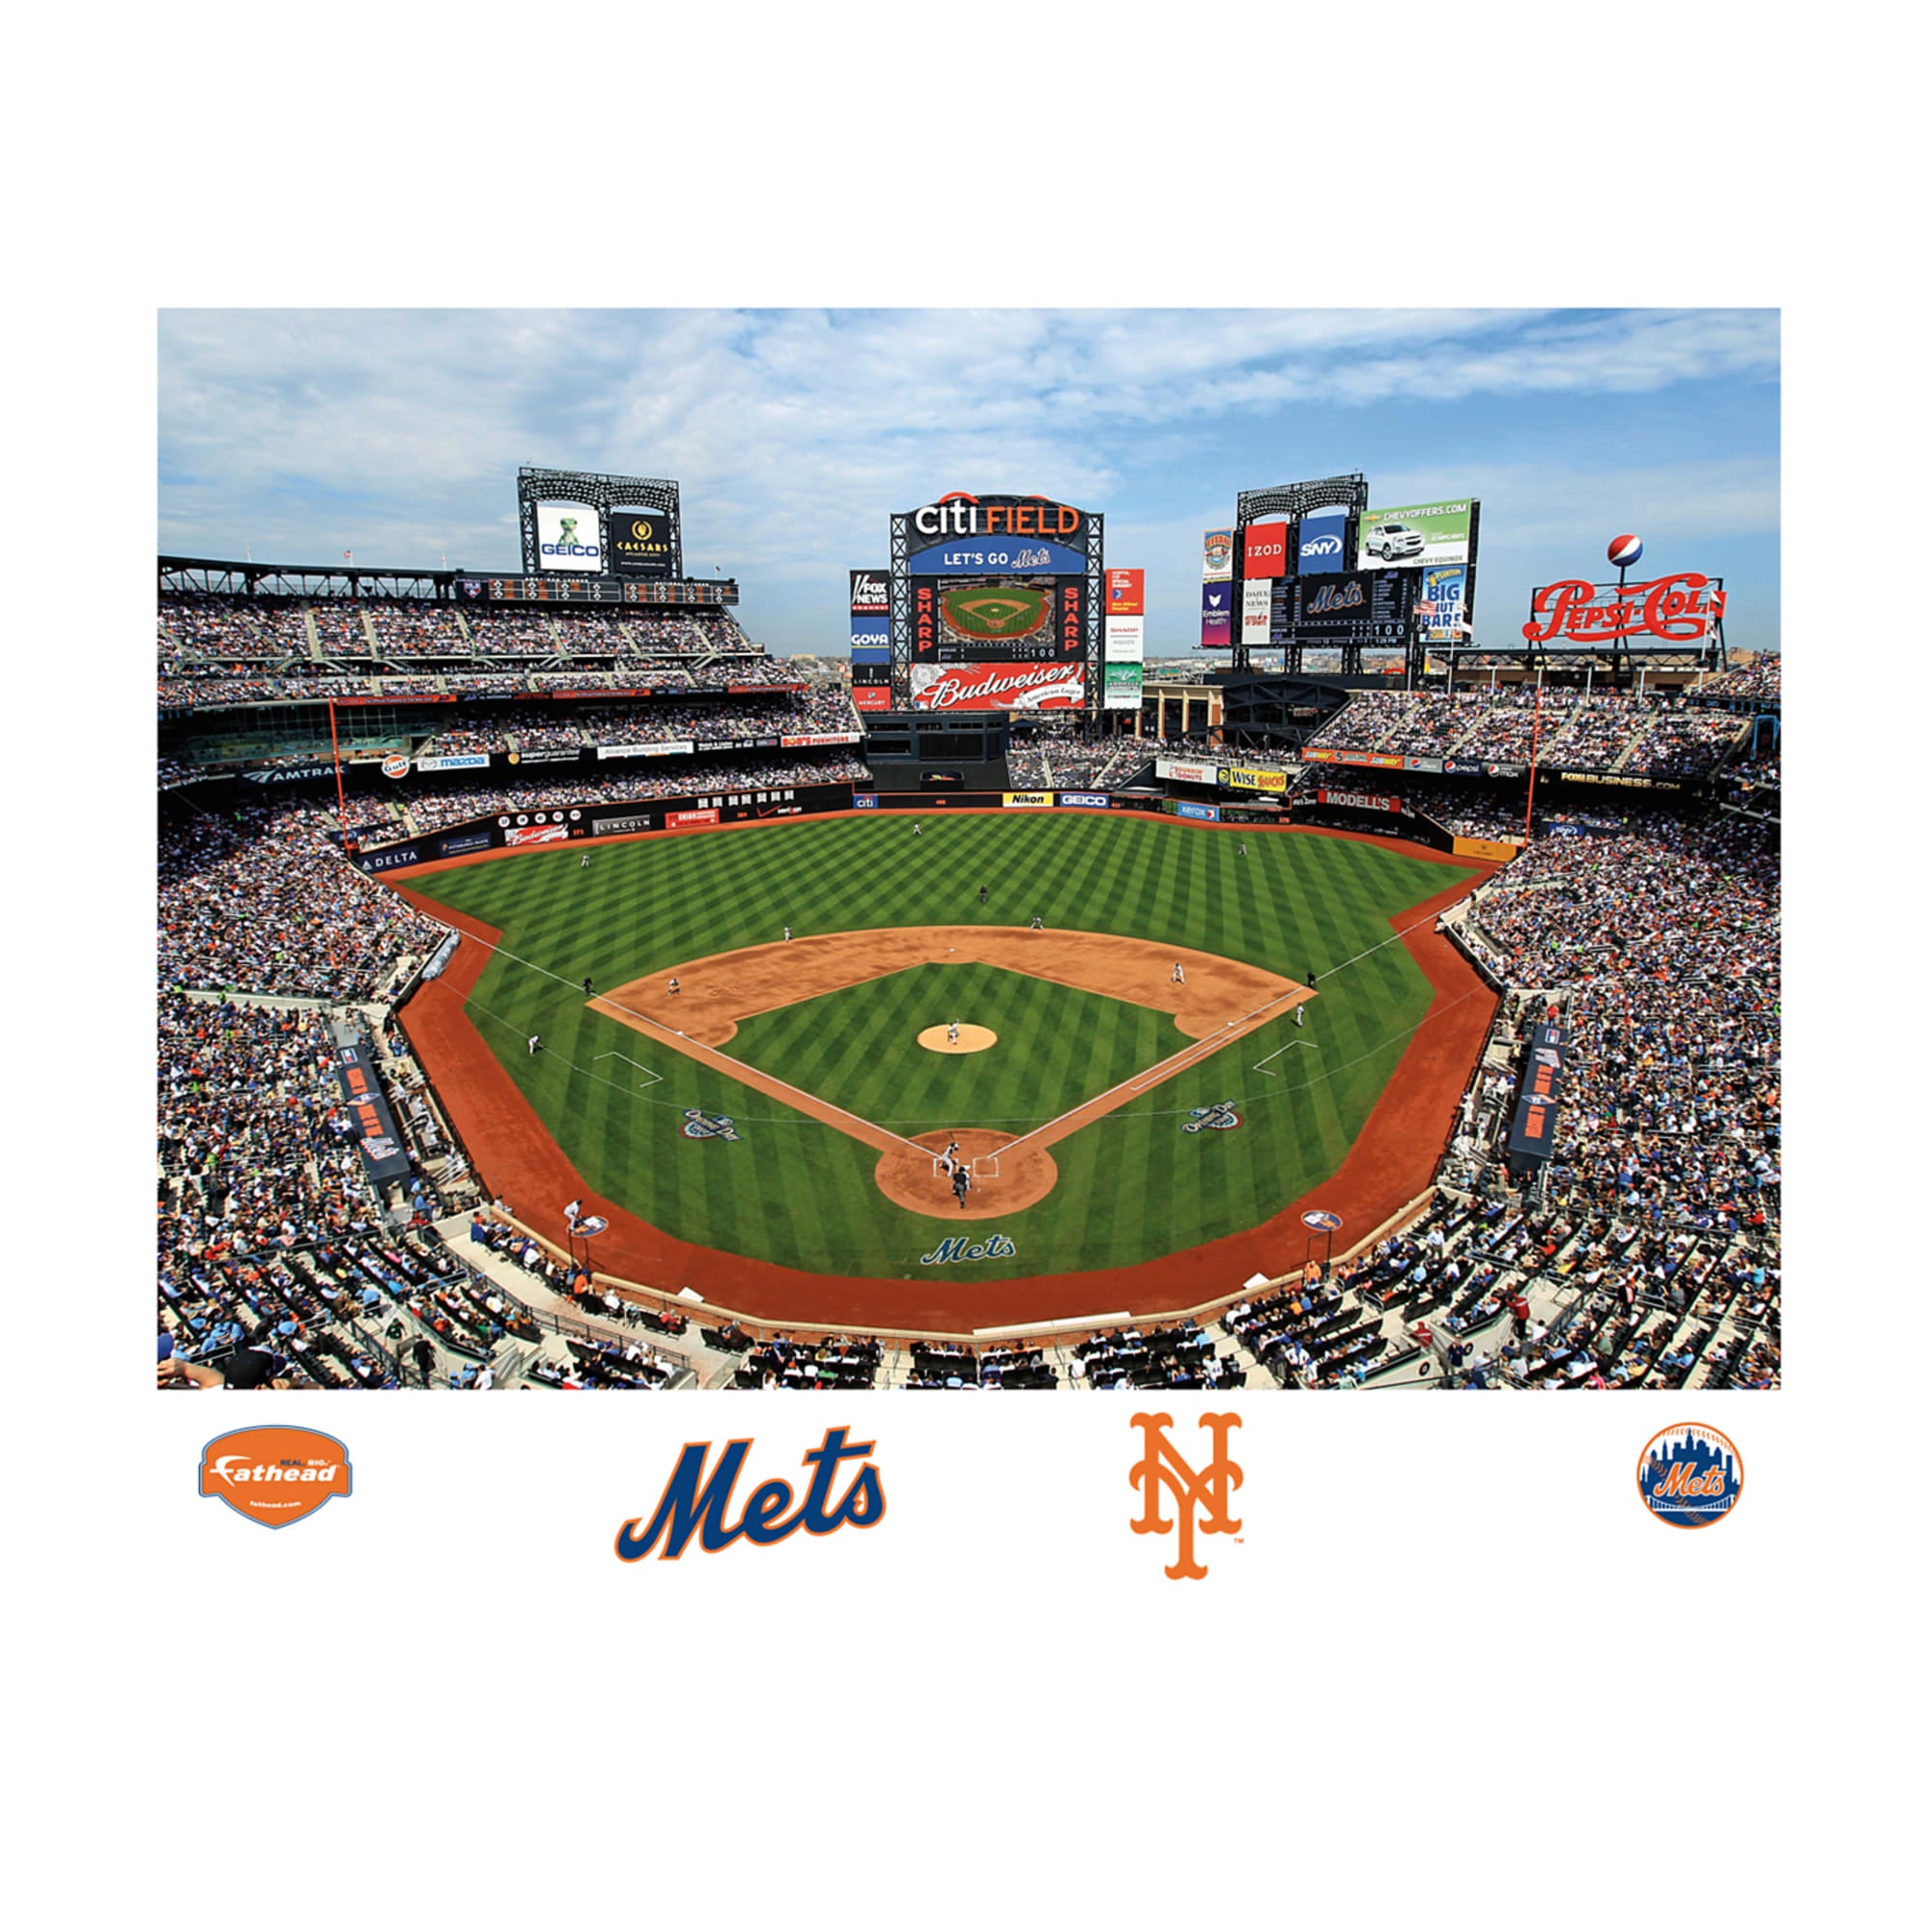 New York Mets: Behind Home Plate Mural - Officially Licensed MLB Remov